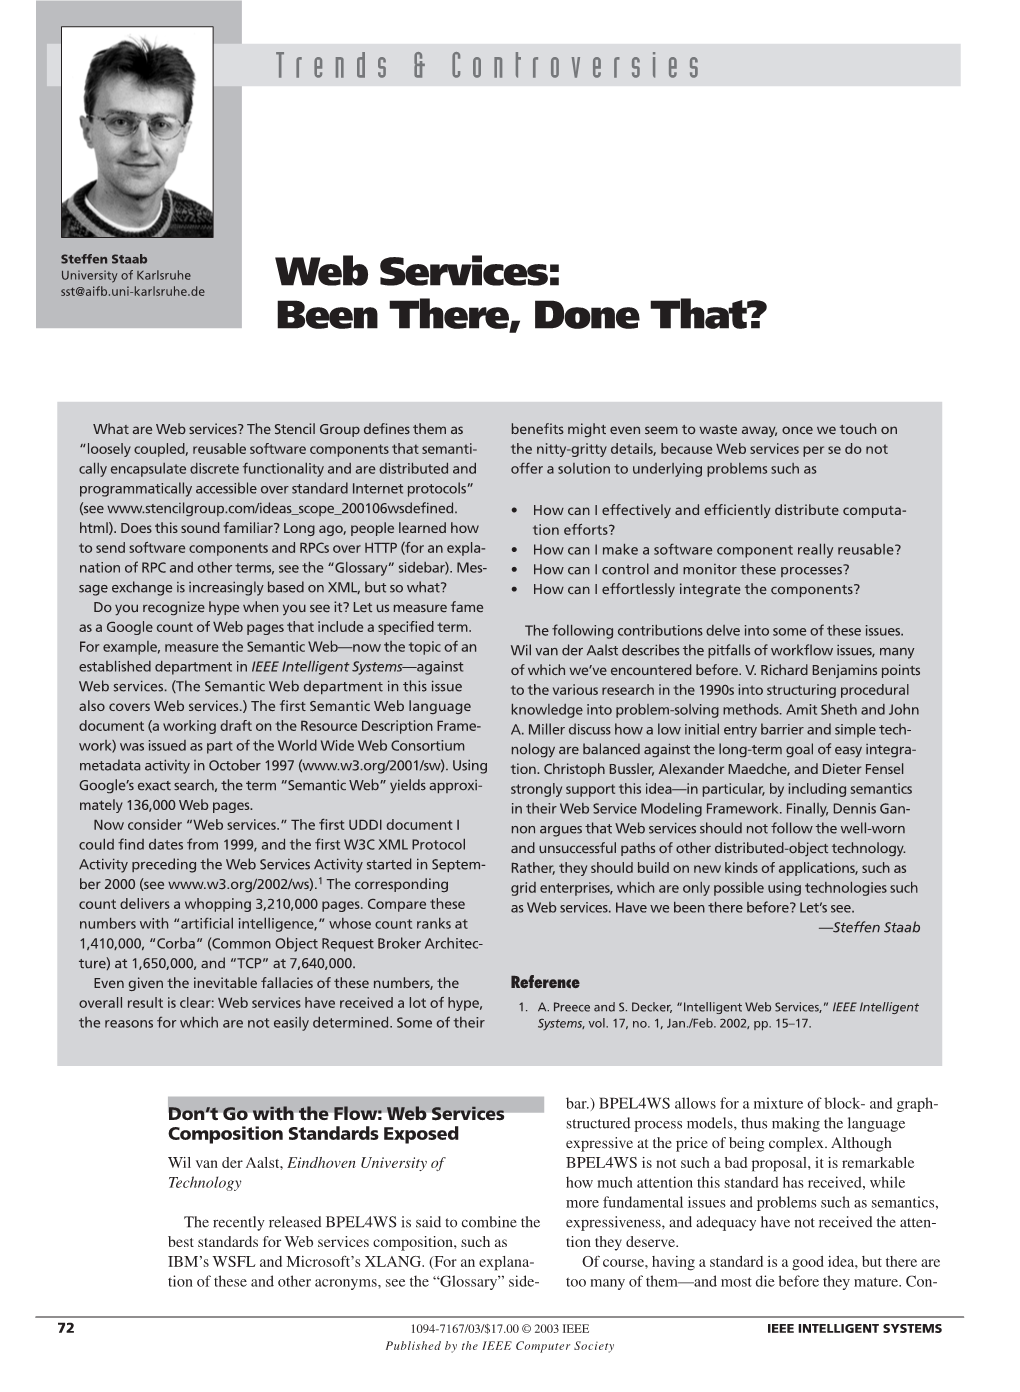 Web Services: Been There, Done That?